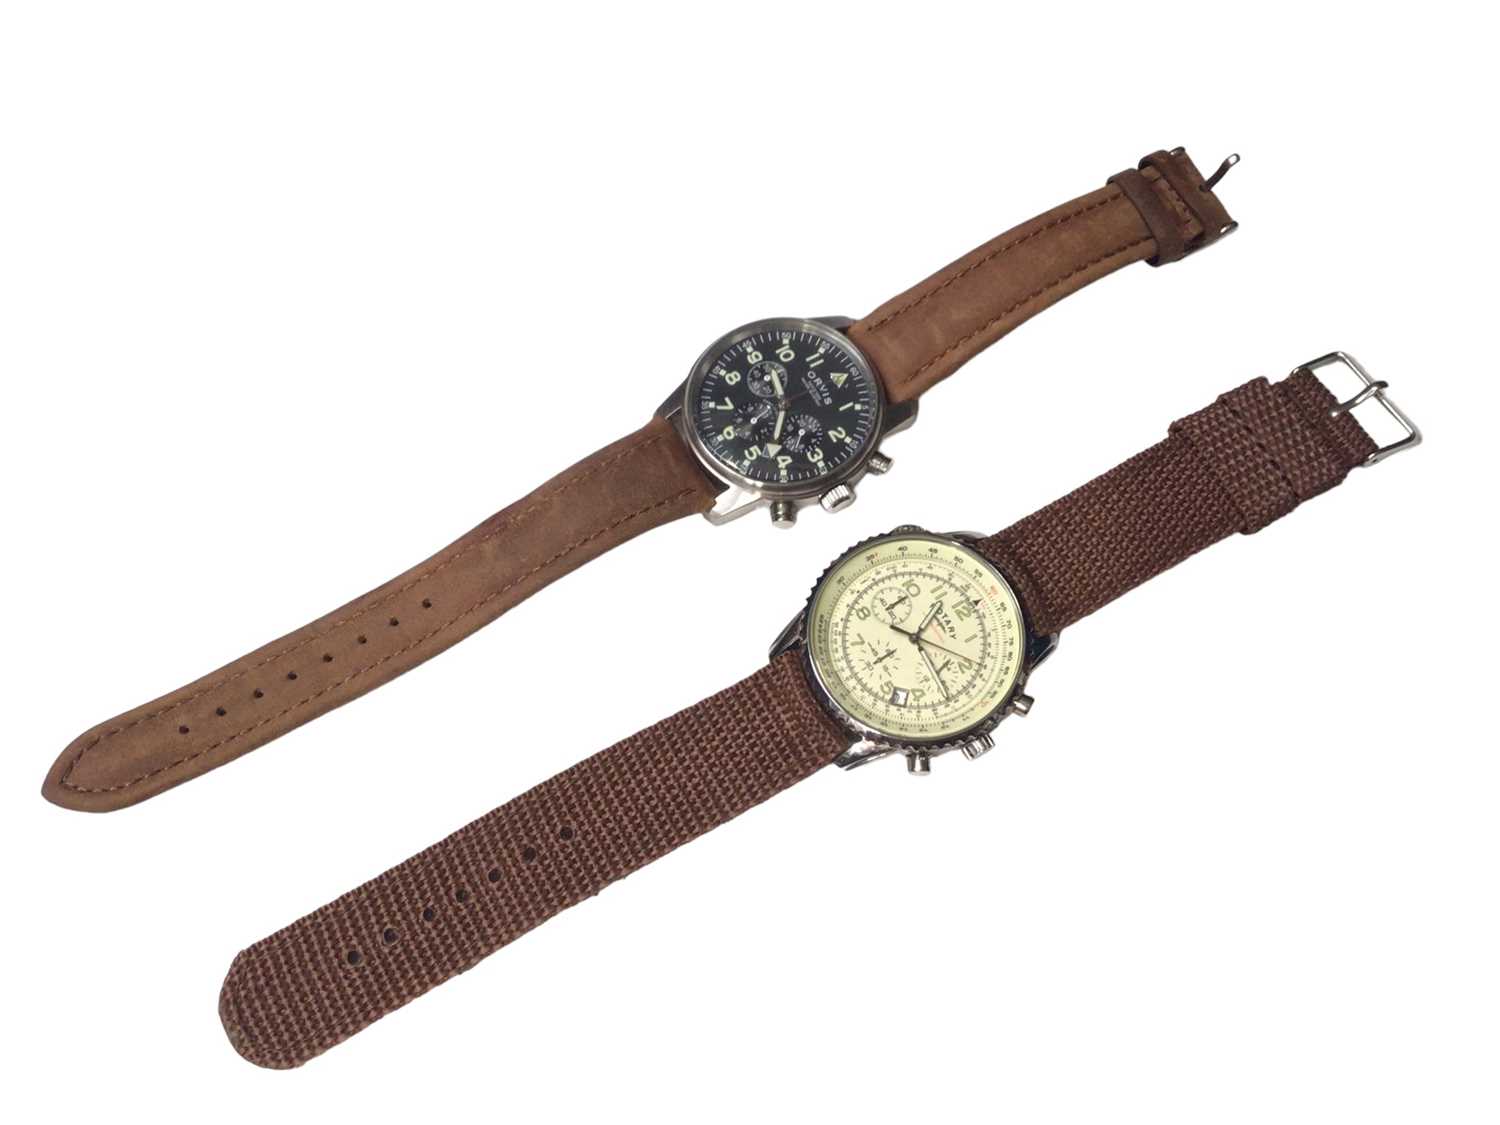 Orvis Chronograph military style wristwatch and a Rotary Chronospeed wristwatch (2) - Image 2 of 6